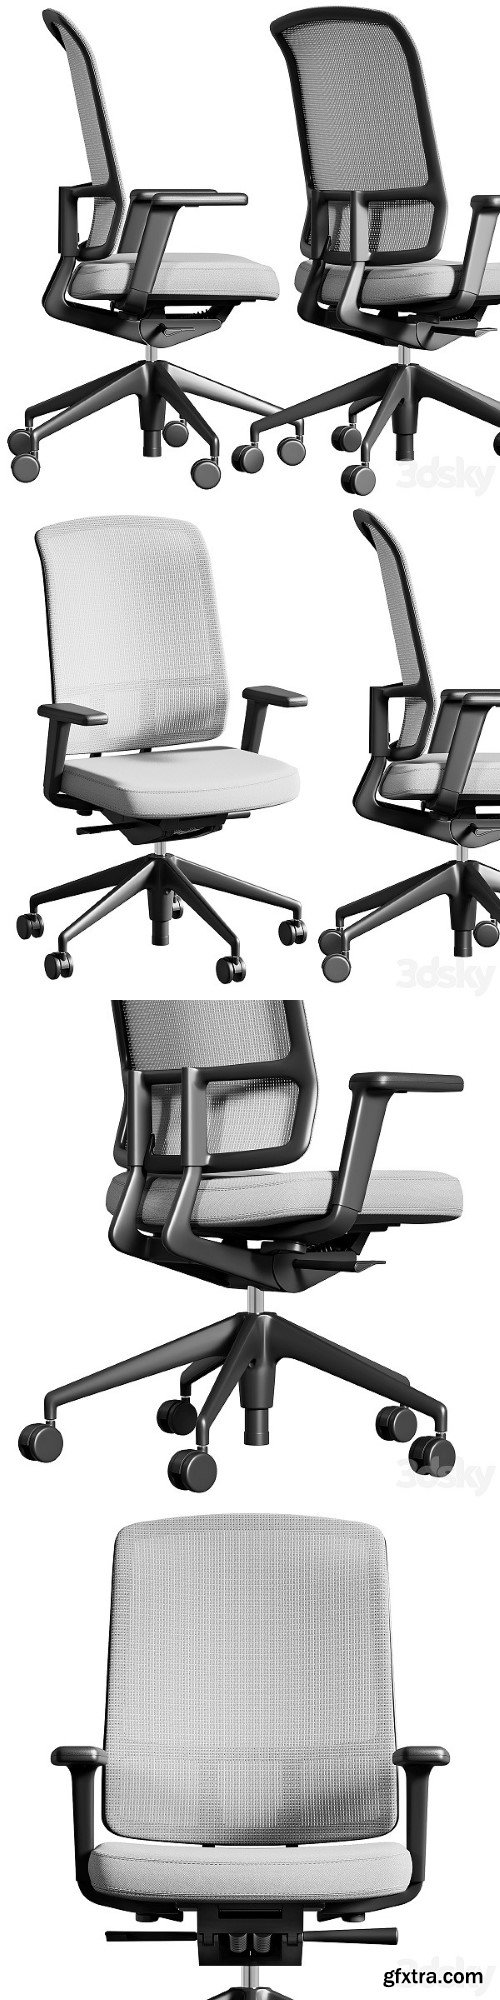 Vitra Office Chair AM